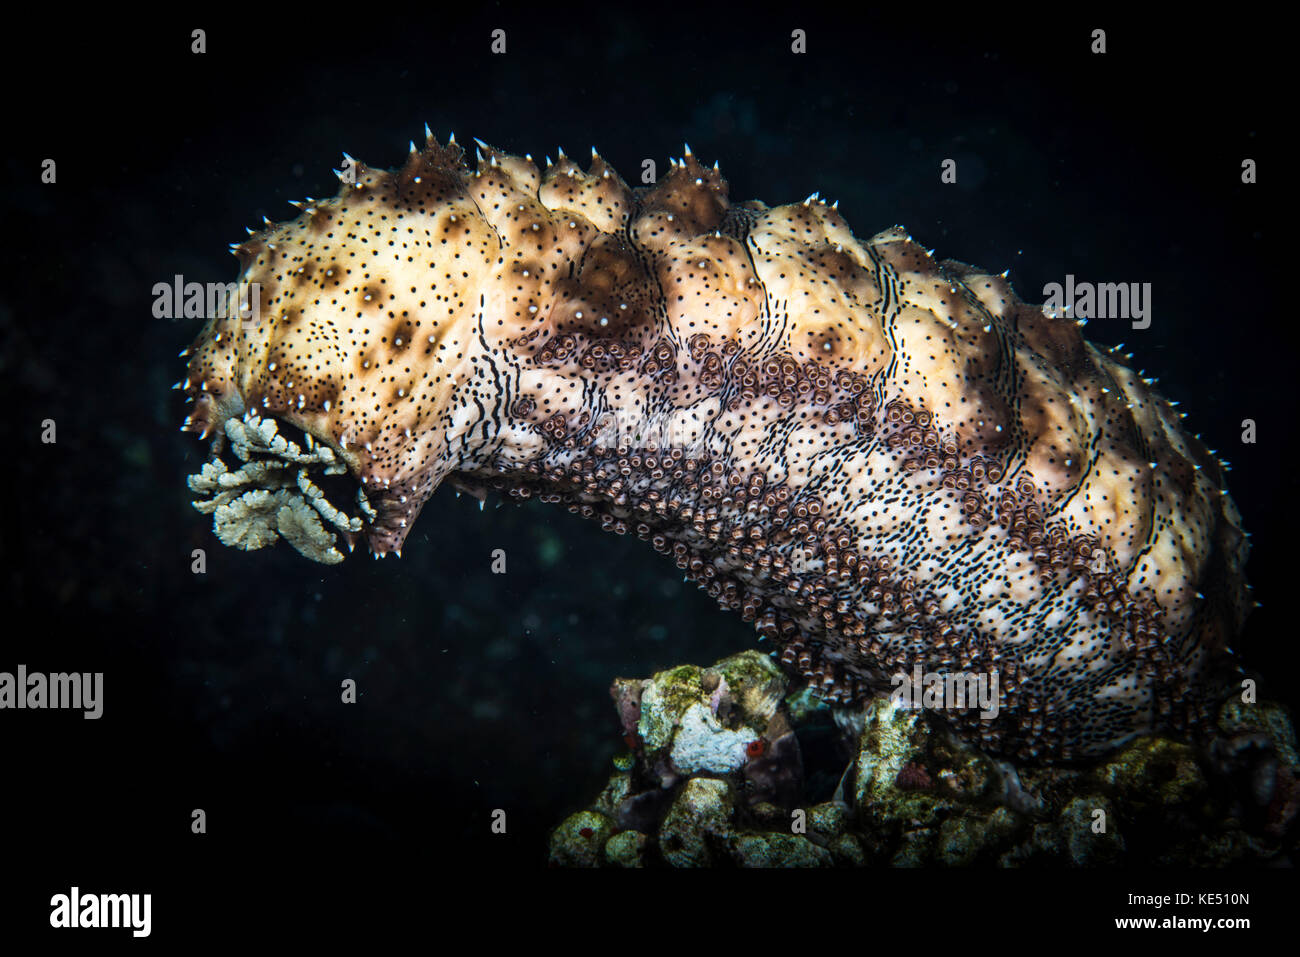 A sea cucumber climbs high and releases spawn in a cloud. Stock Photo